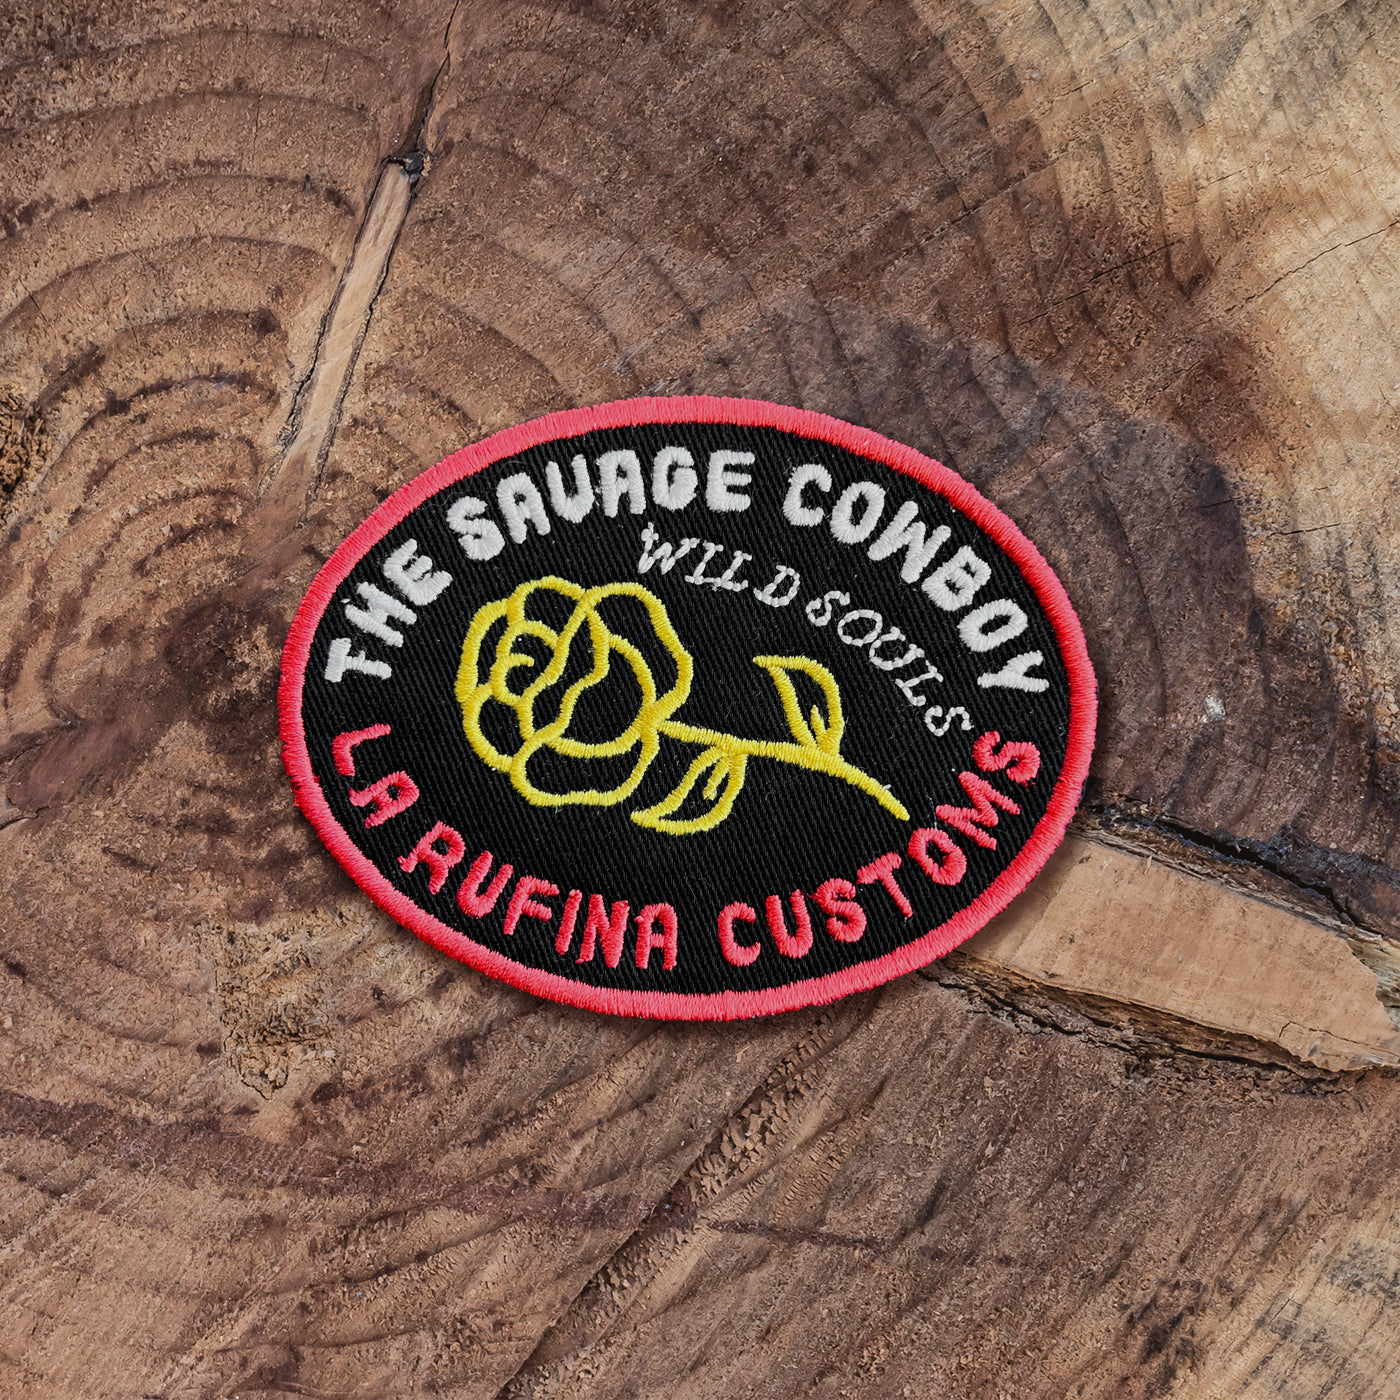 The Savage Cowboy Rose patch